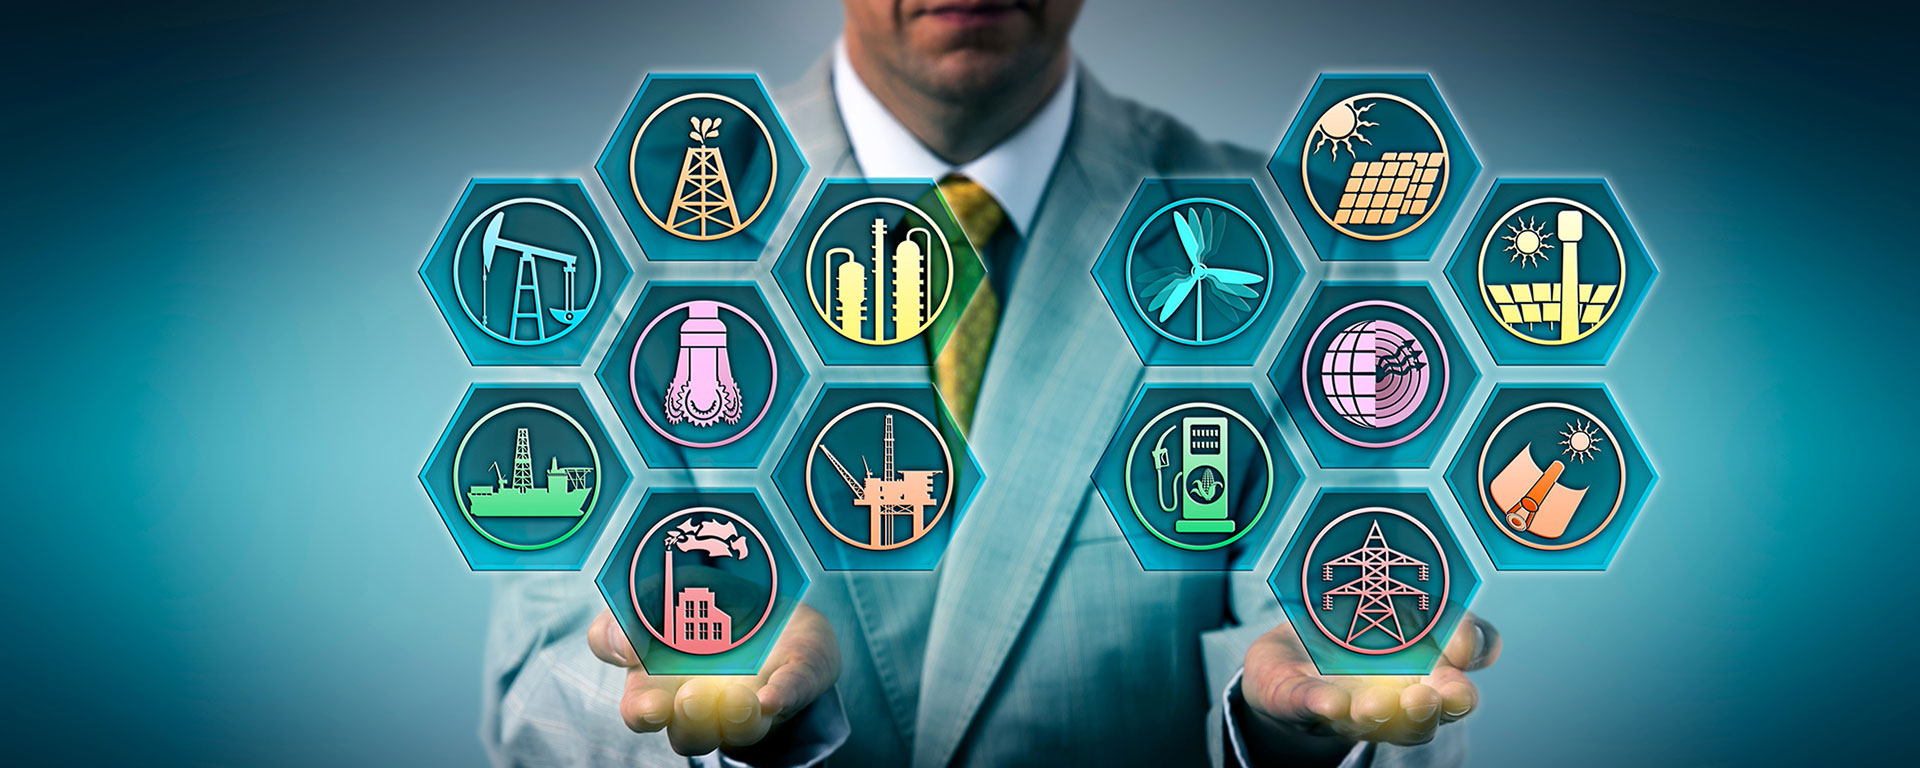 Man holding various energy related icons in his hands.